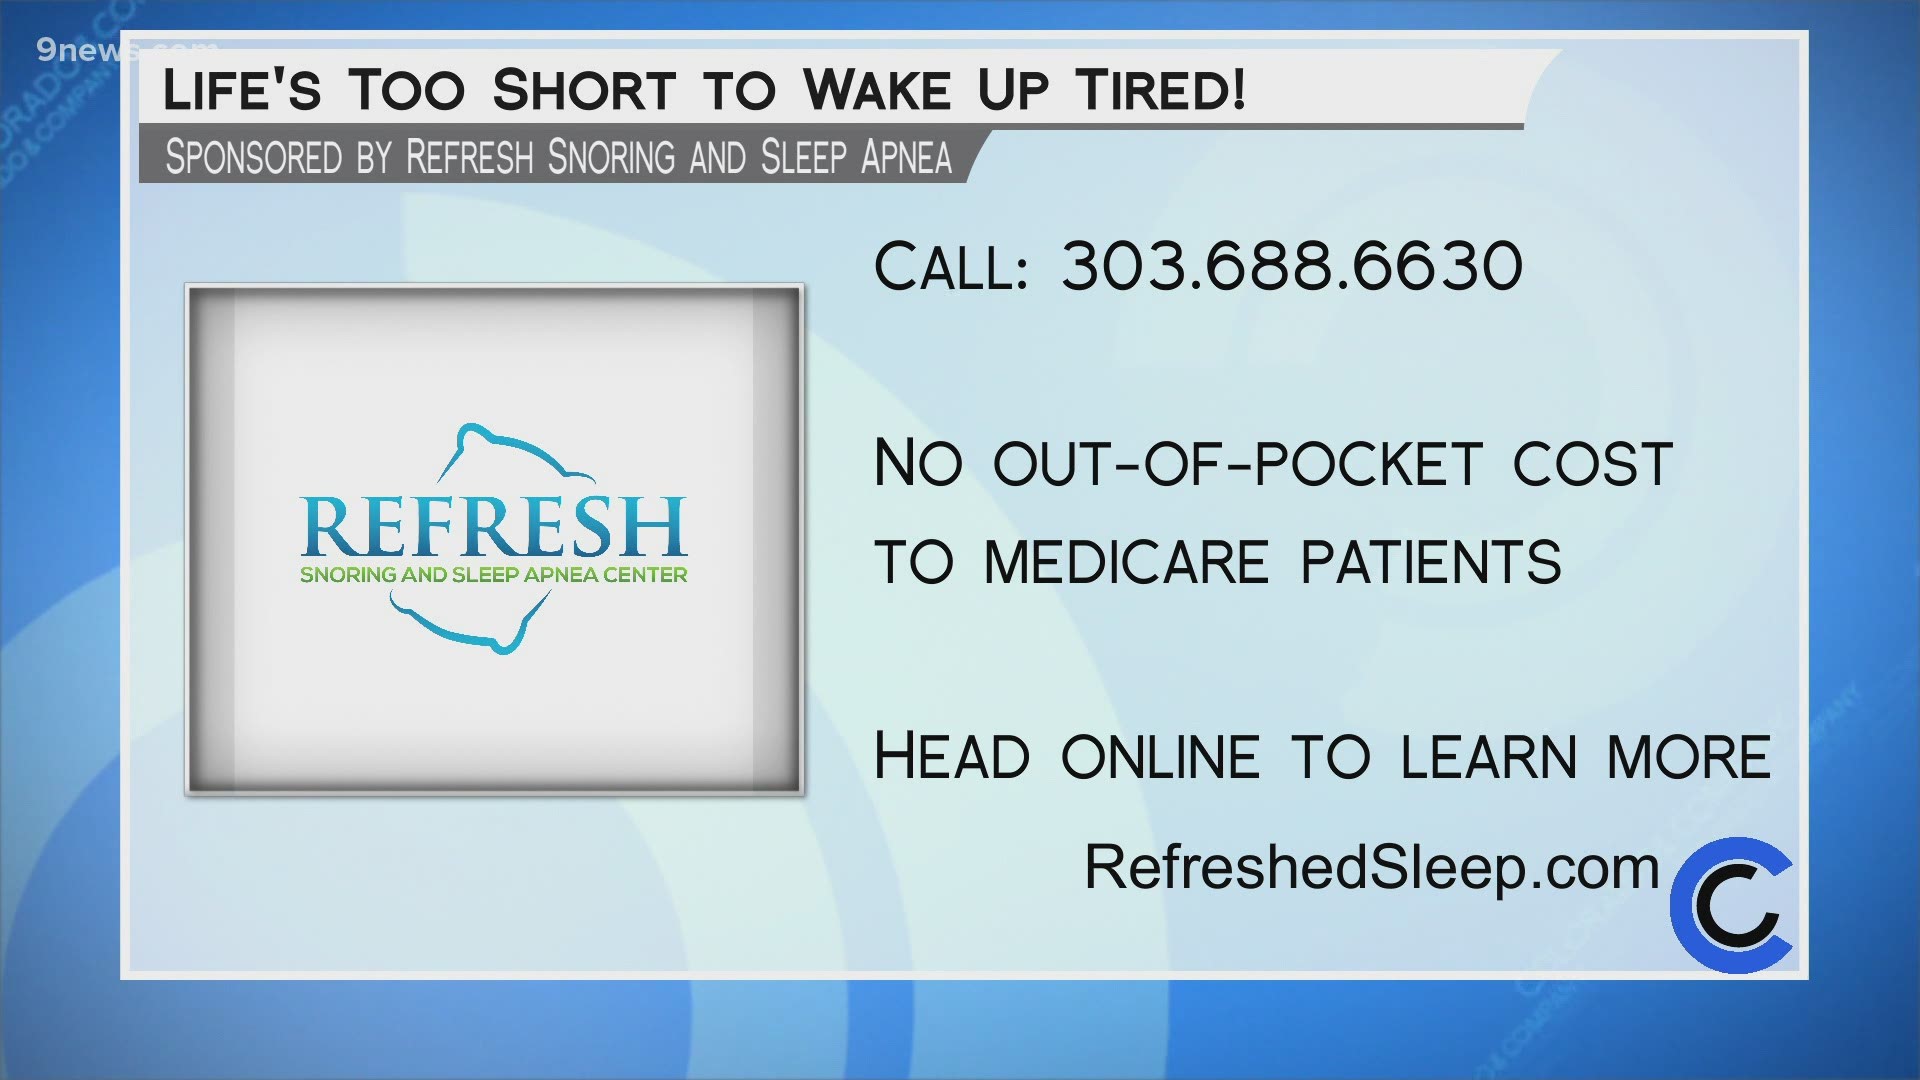 Call 303.688.6630 or visit RefreshedSleep.com to find solutions to your sleep apnea issues.